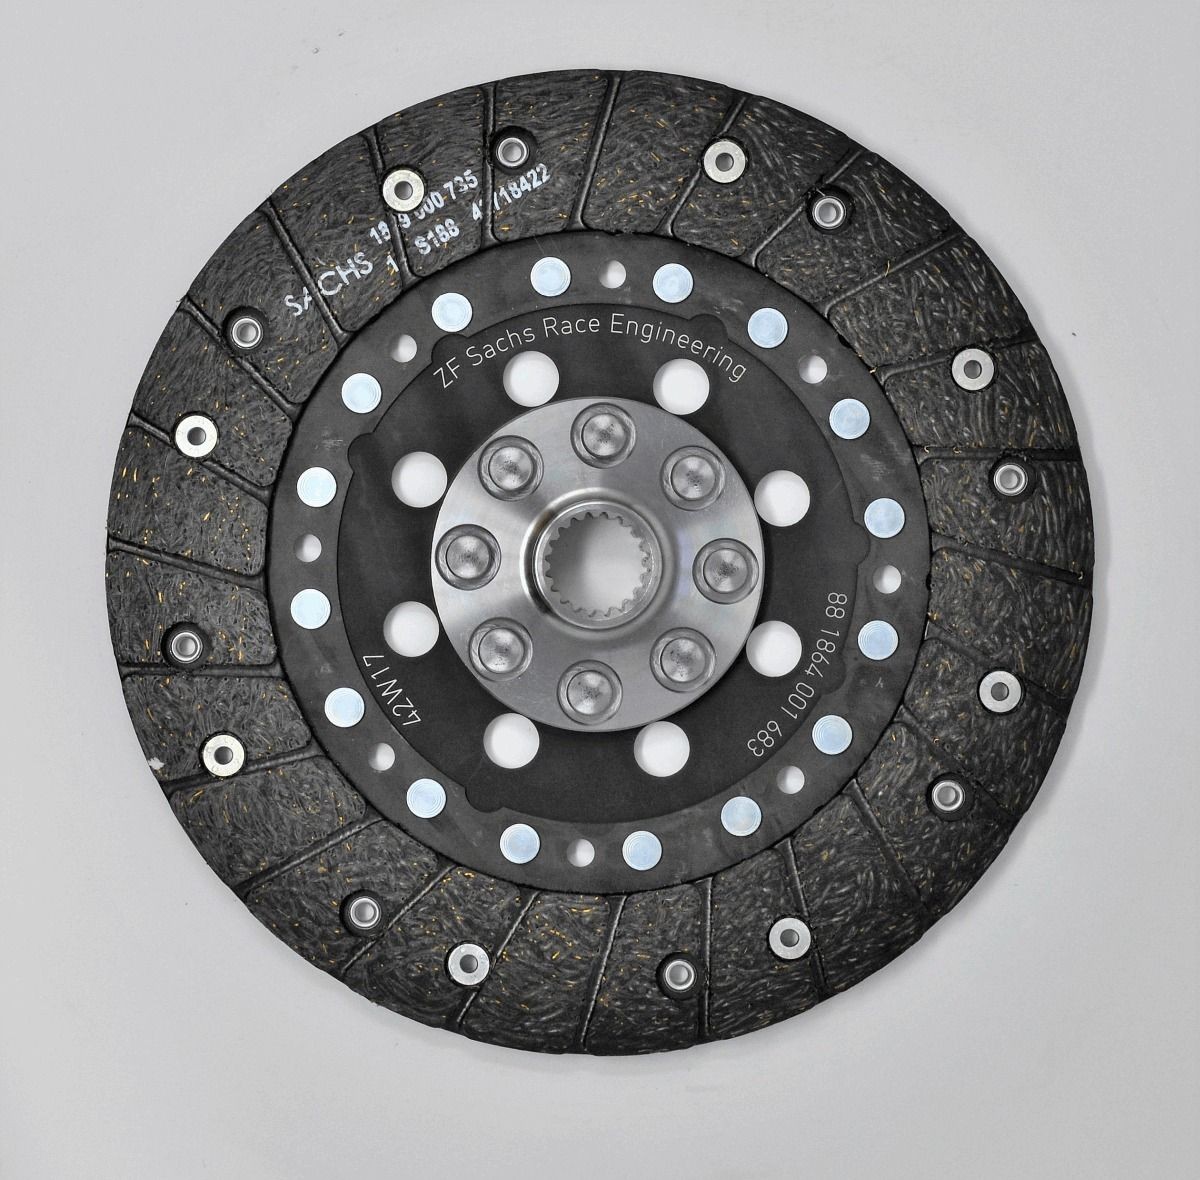 SACHS PERFORMANCE 881864 001683 Clutch Disc 215mm, Number of Teeth: 20